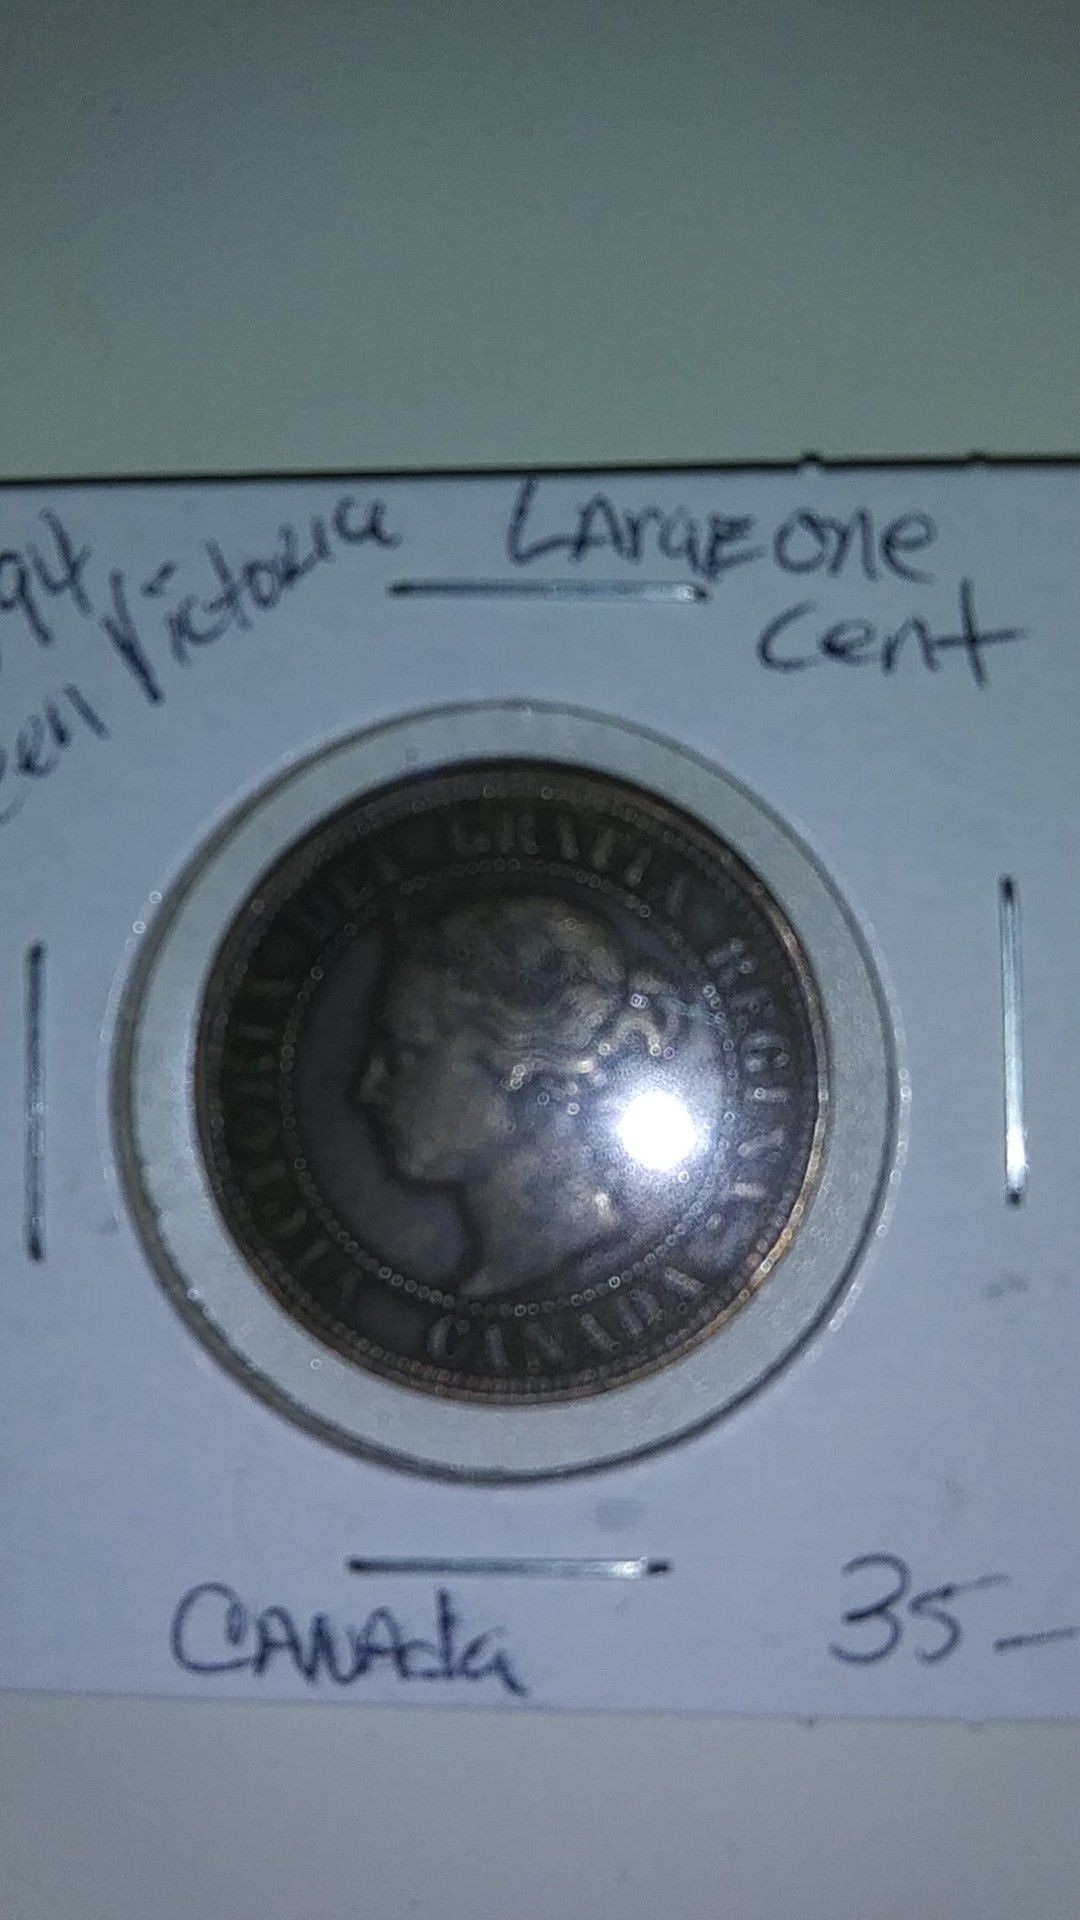 1894 Queen Victoria large one cent